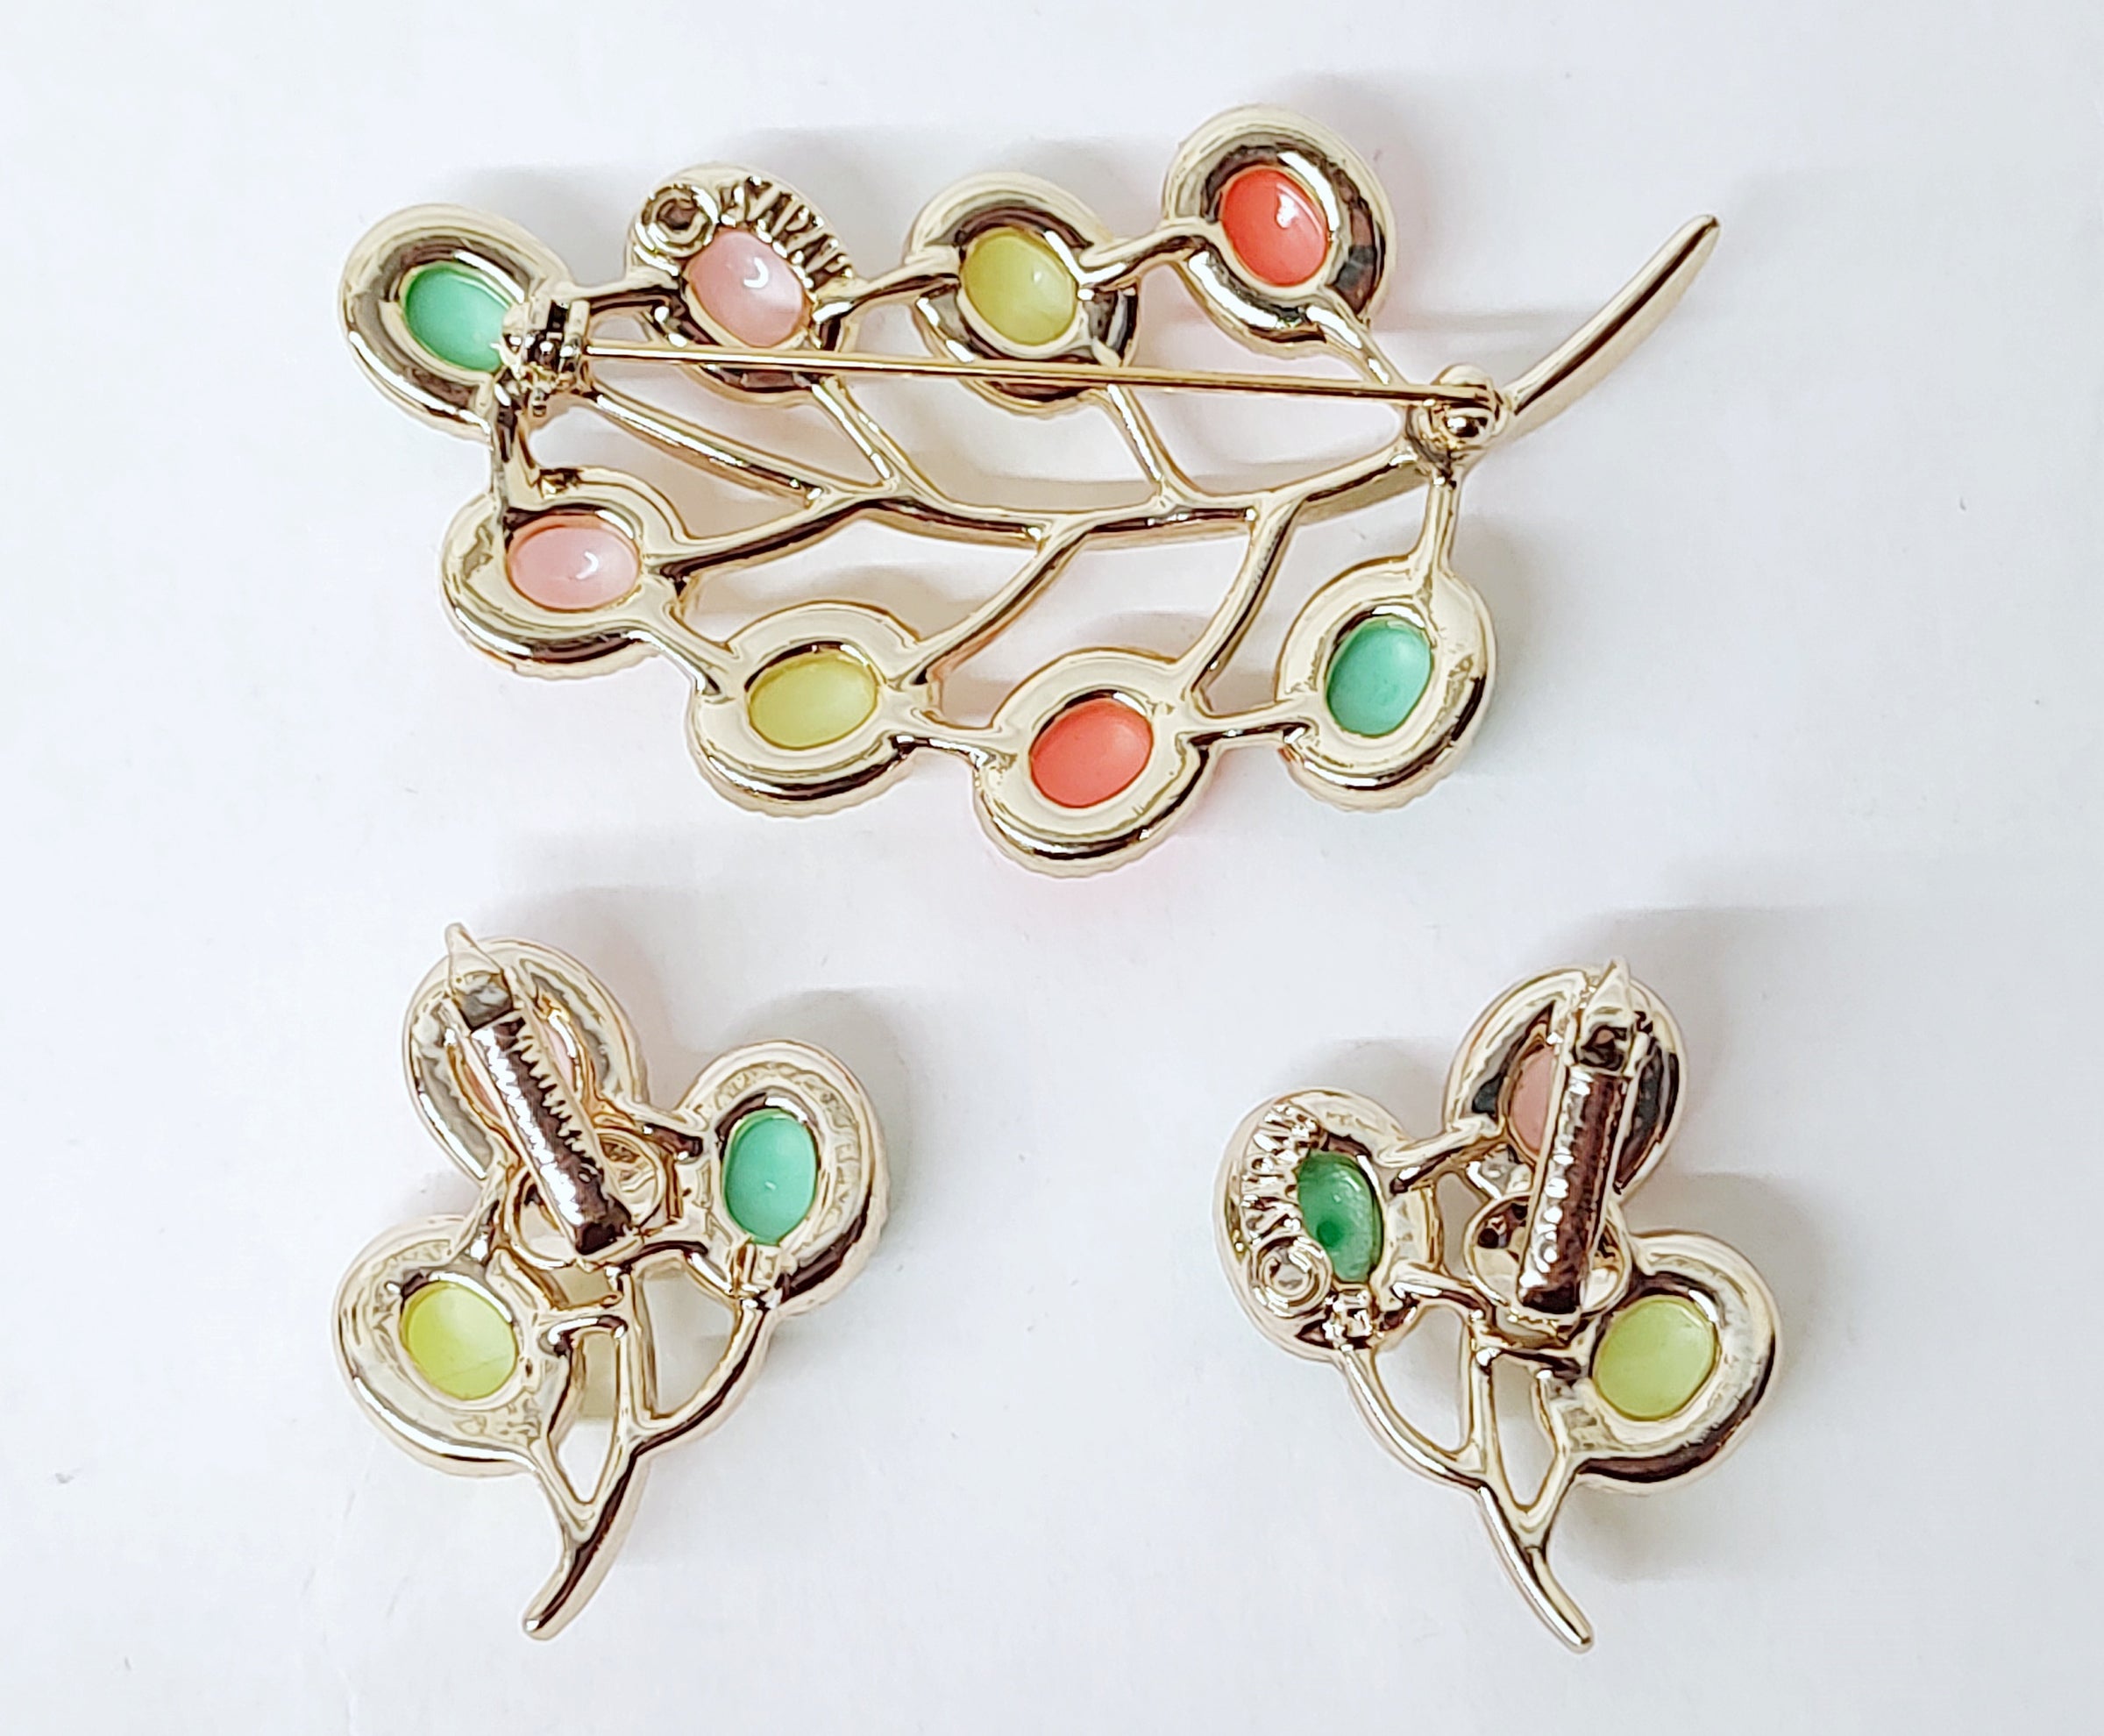 1973 Sarah Coventry Candy Land Brooch and Earrings Set - Hers and His Treasures